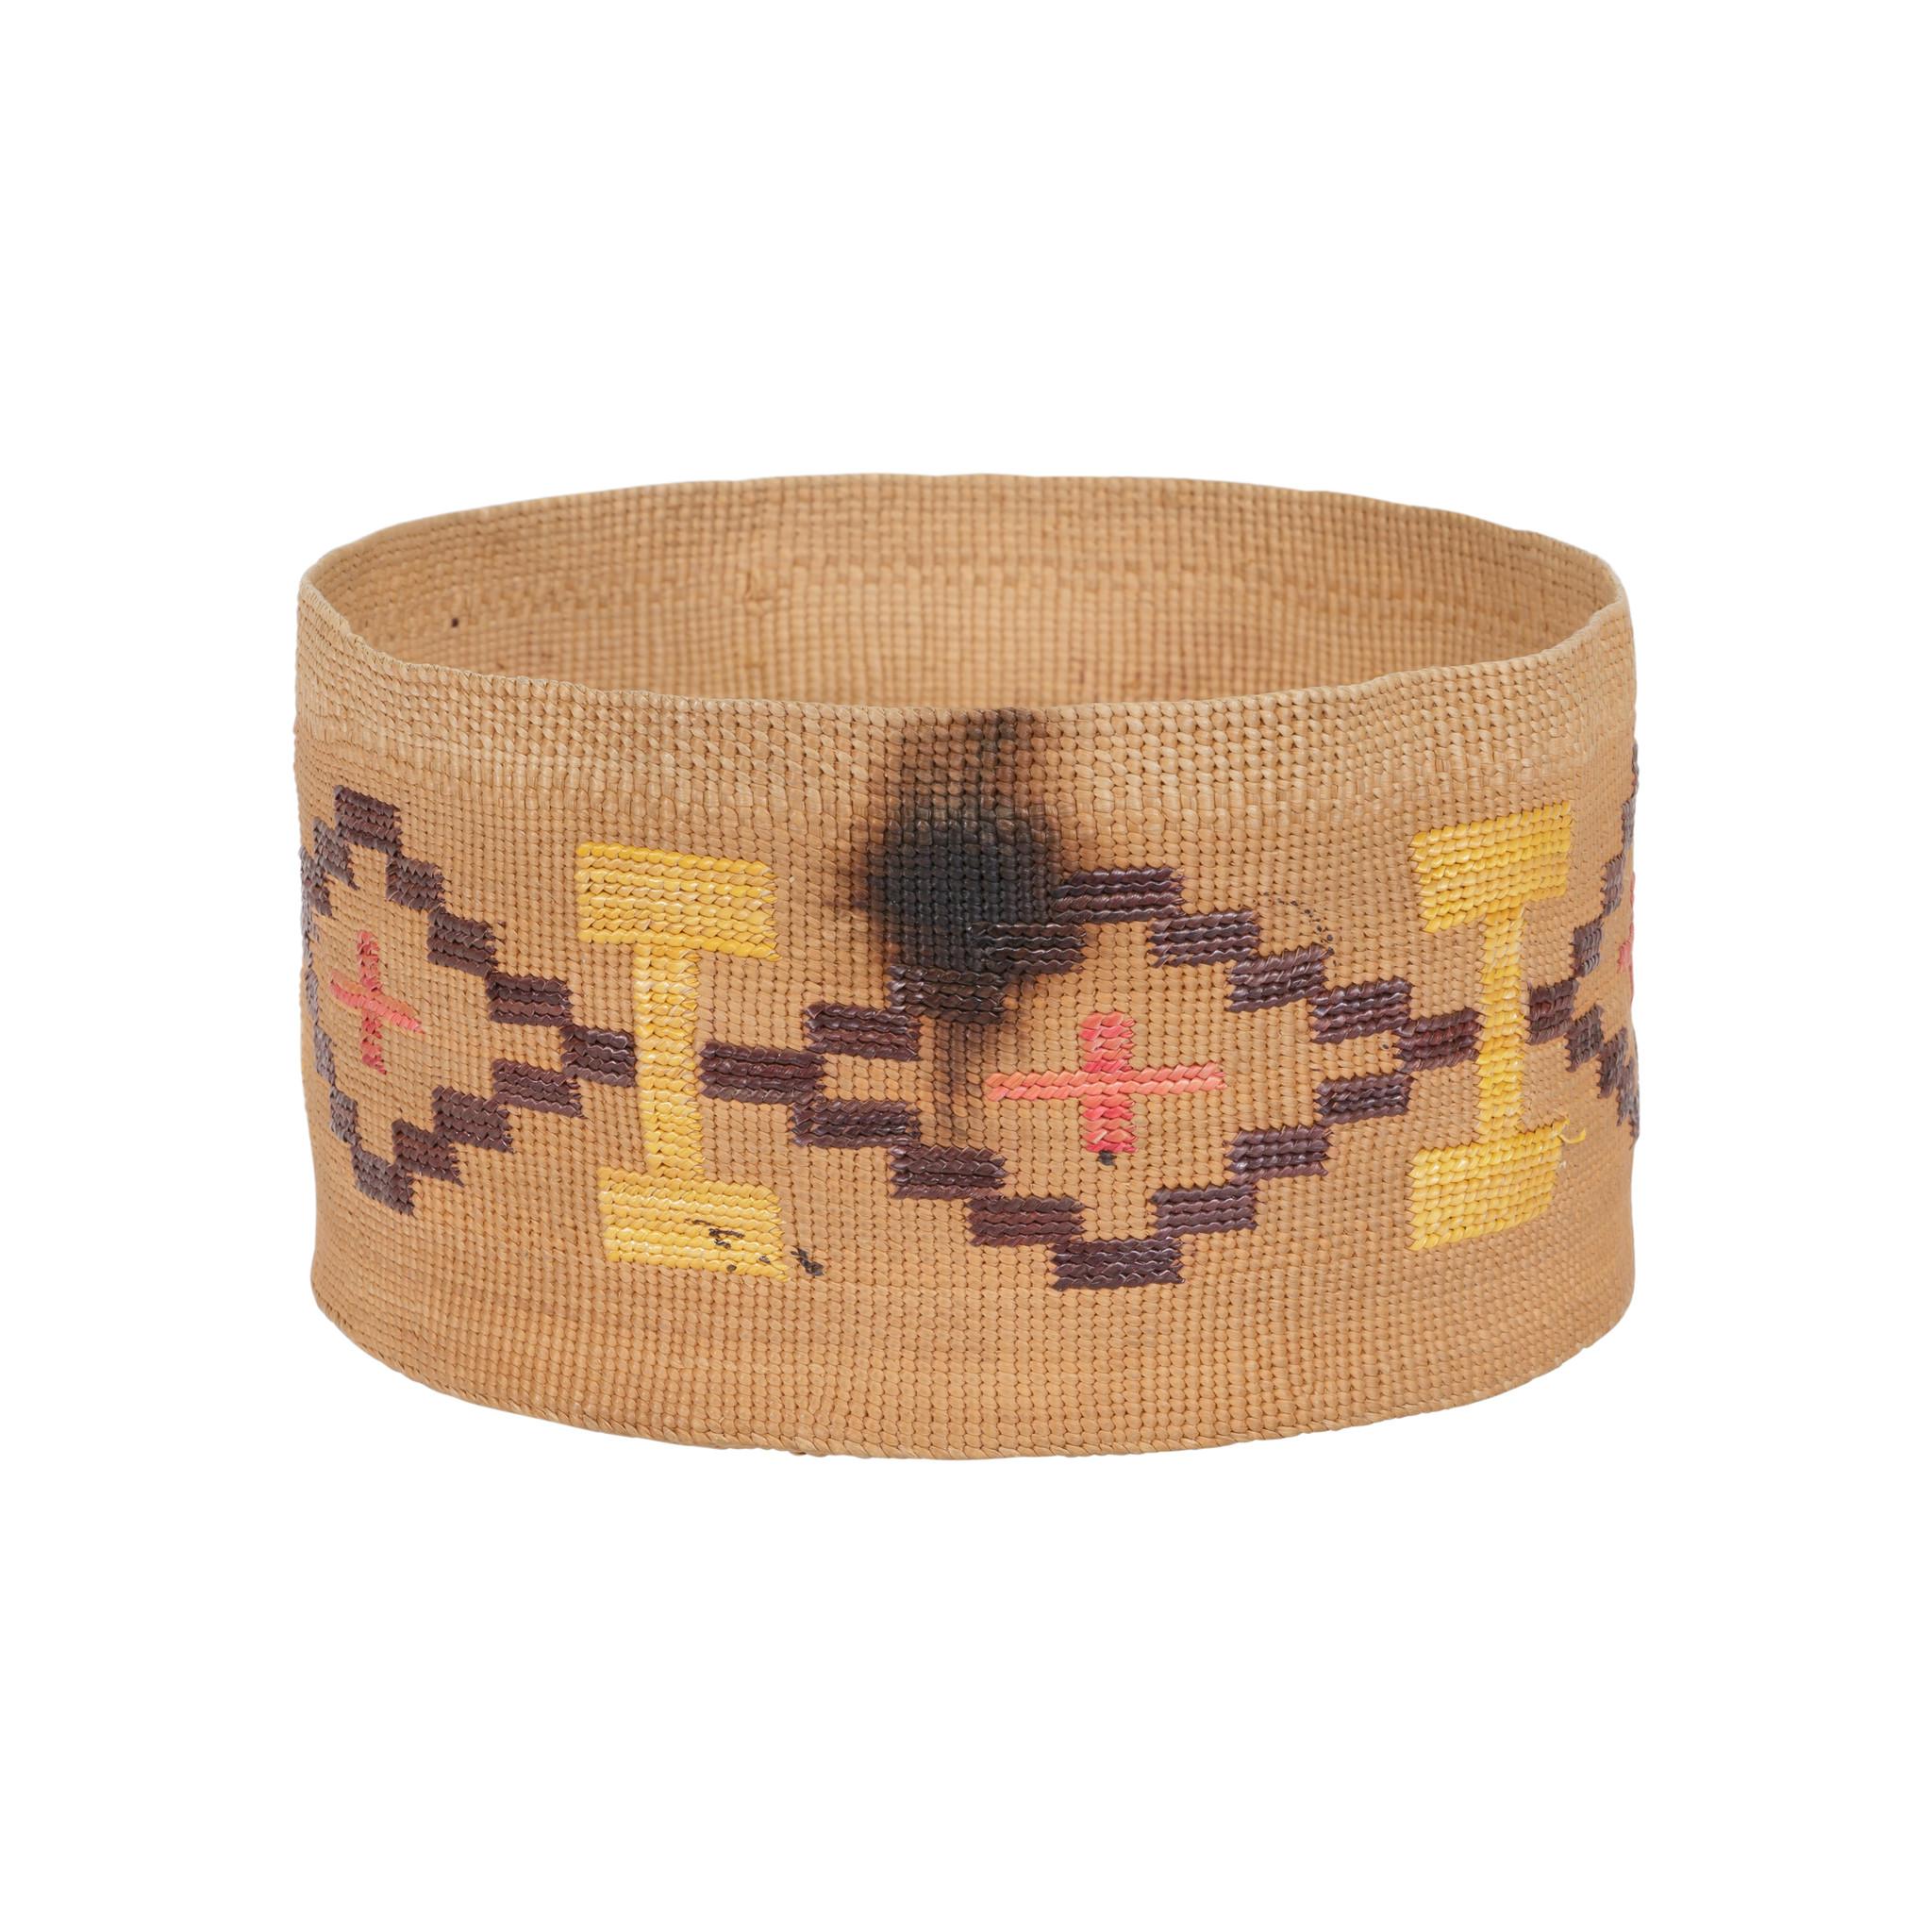 Bright colored Tlingit lidded rattle top basket. Exceptional condition. One small stain not distracting.

Period: Last quarter of the 19th century

Origin: Alaska

Size: 3 1/2